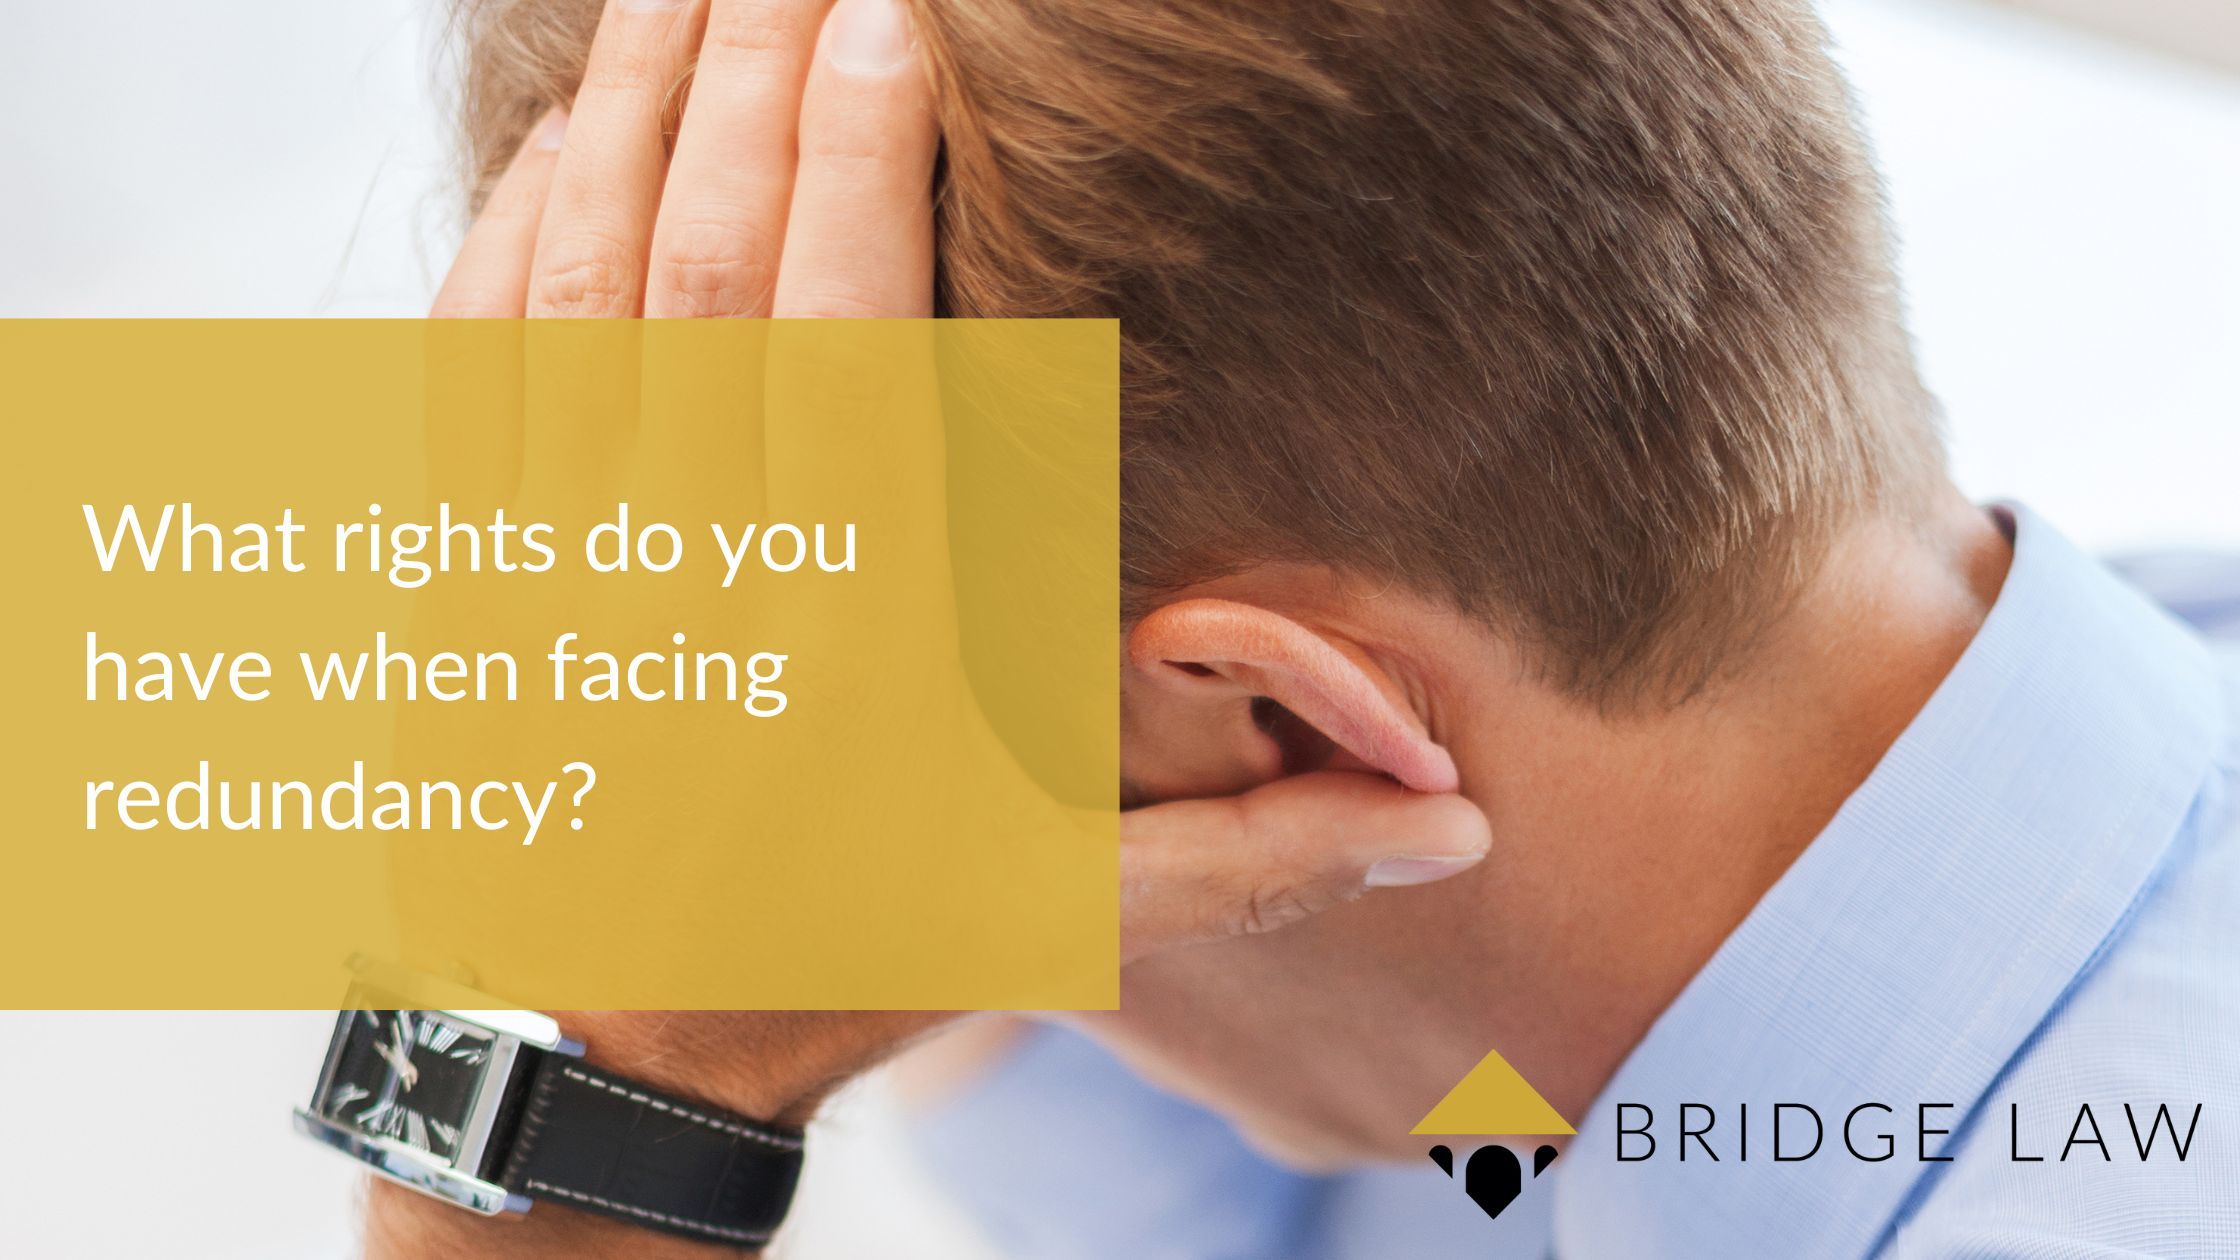 Bridge Law blog header image 'what rights do you have when facing redundancy?'